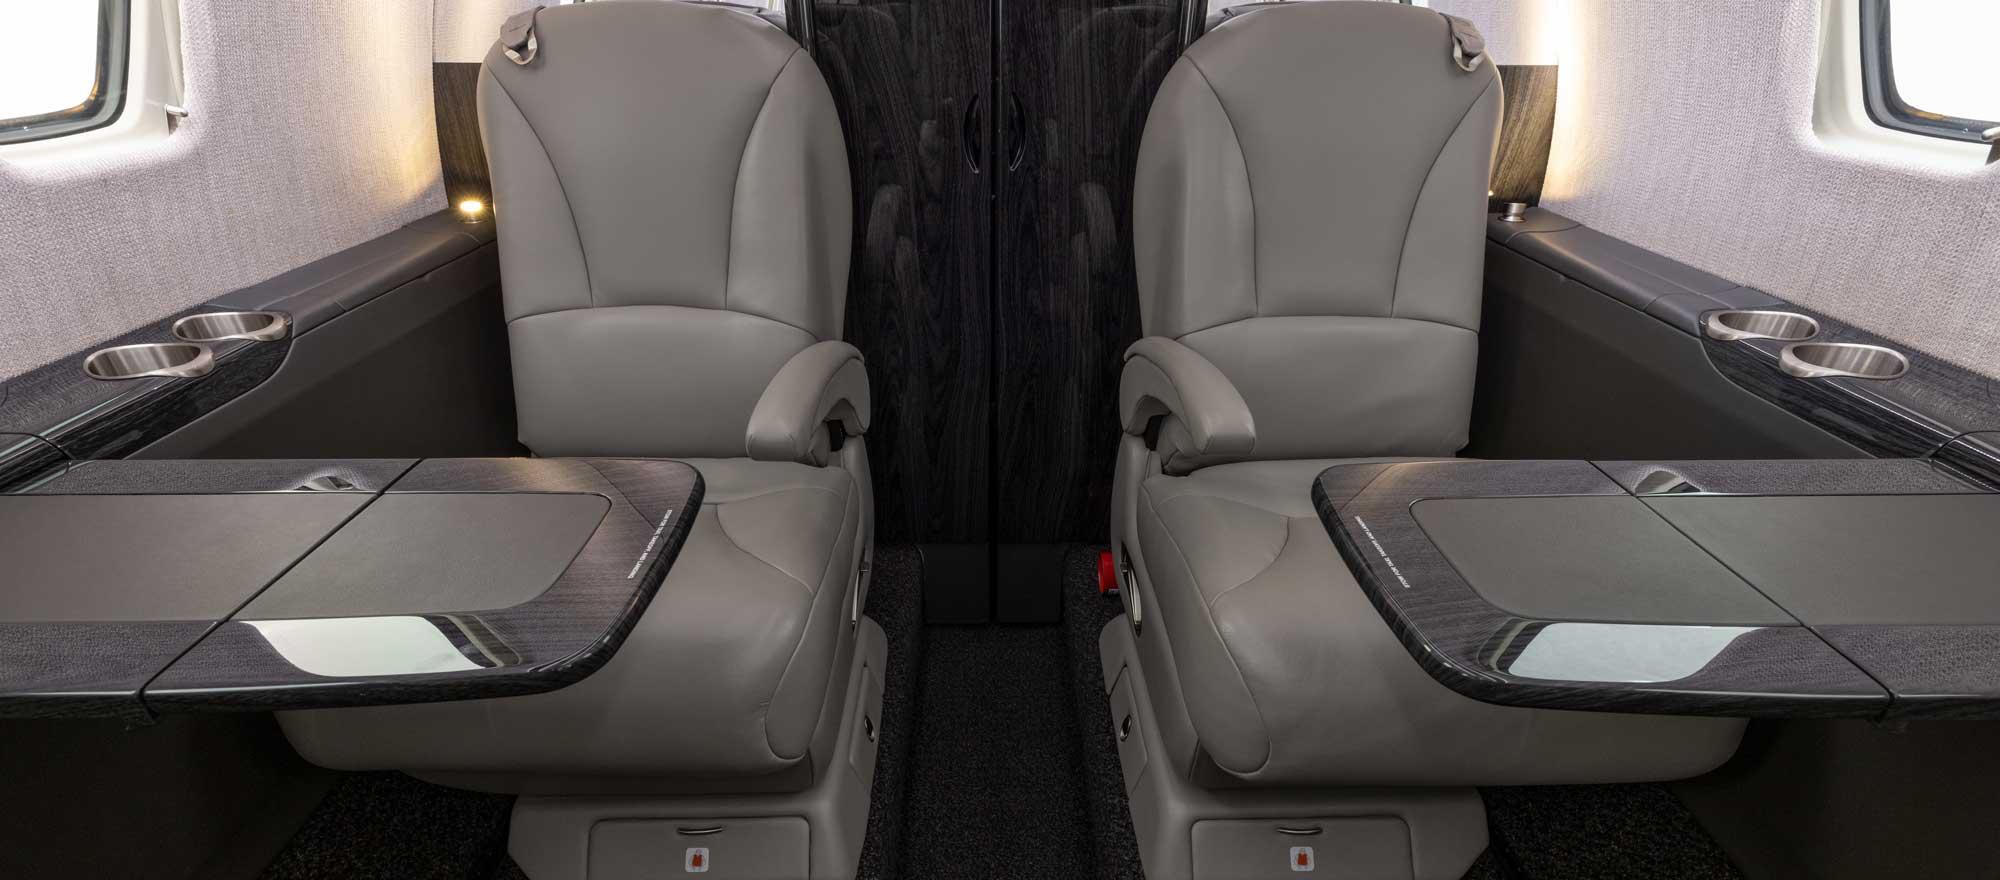 Duncan Aviation uses a process called hydrodipping to expand cabin design options while reducing cost and downtime.